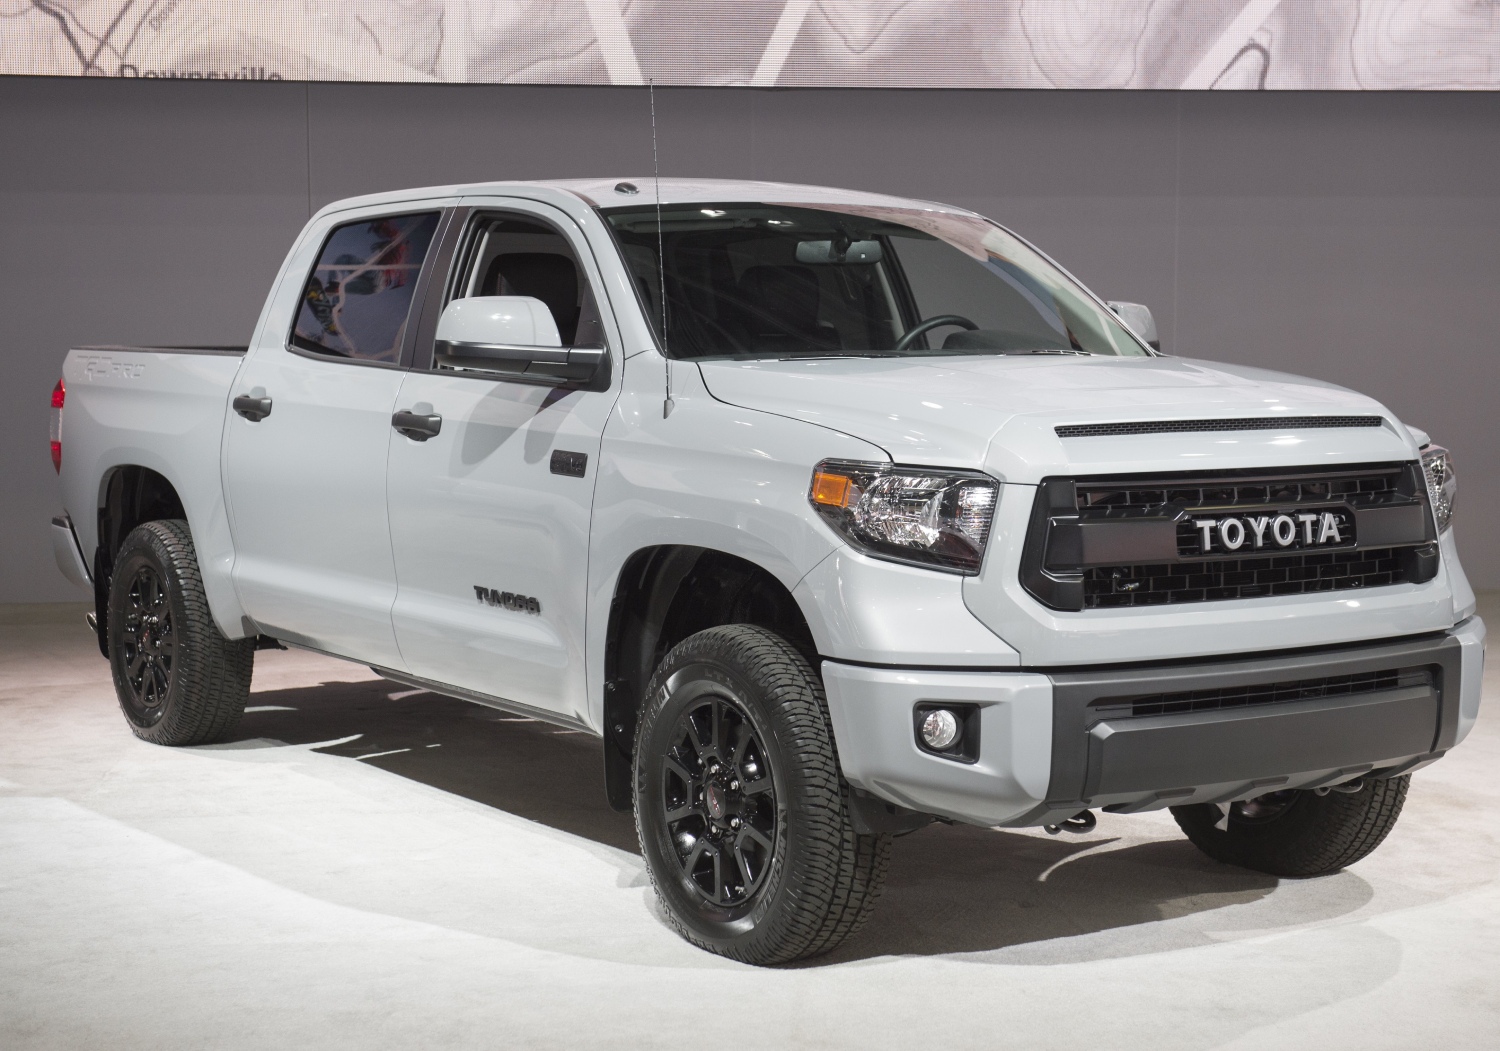 The most common Toyota Tundra problems like this 2017 version